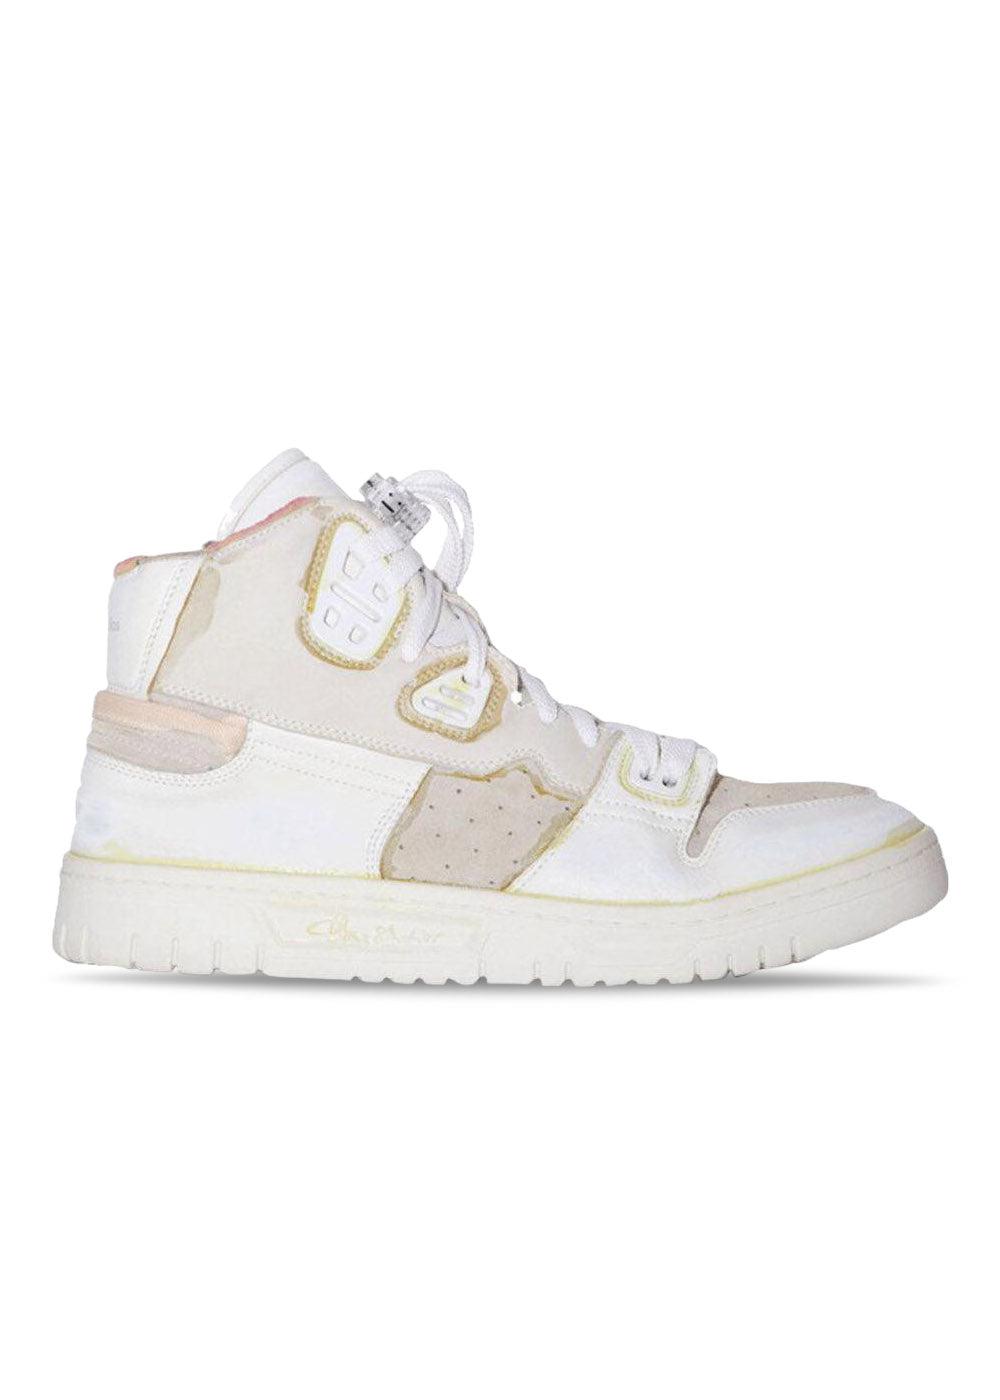 08STHLM High Destroyed W Pink/Beige High Top Leather Sneakers